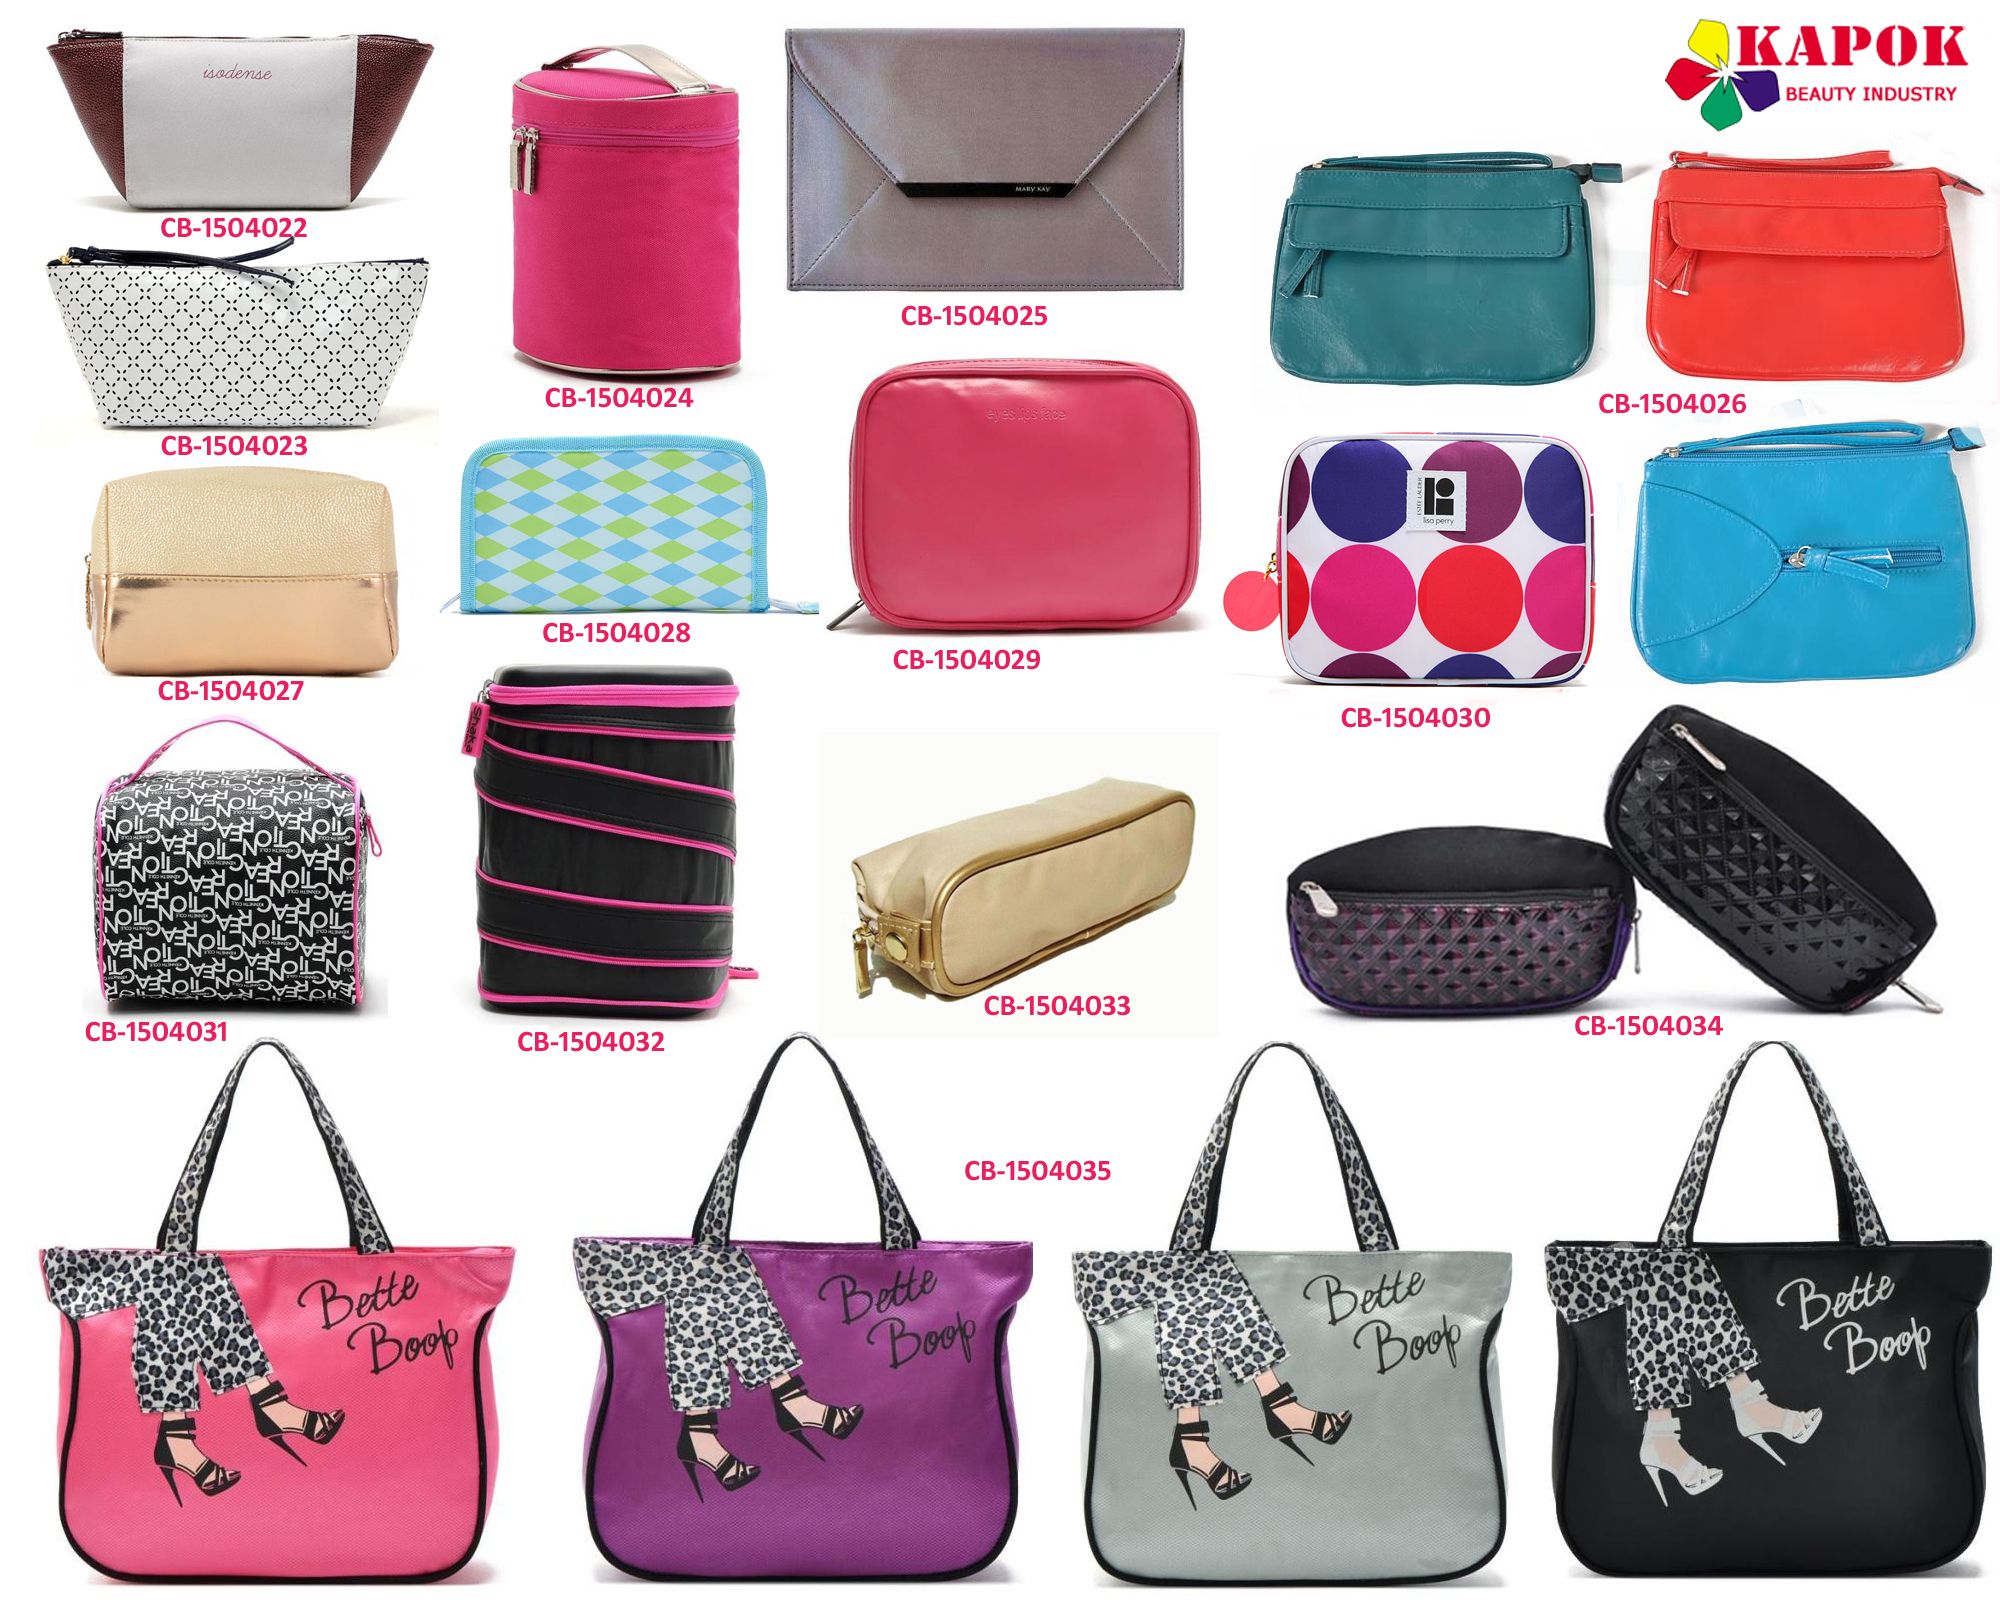 mini bags, makeup pouches, cosmetic bags, toiletry bags - OEM factory